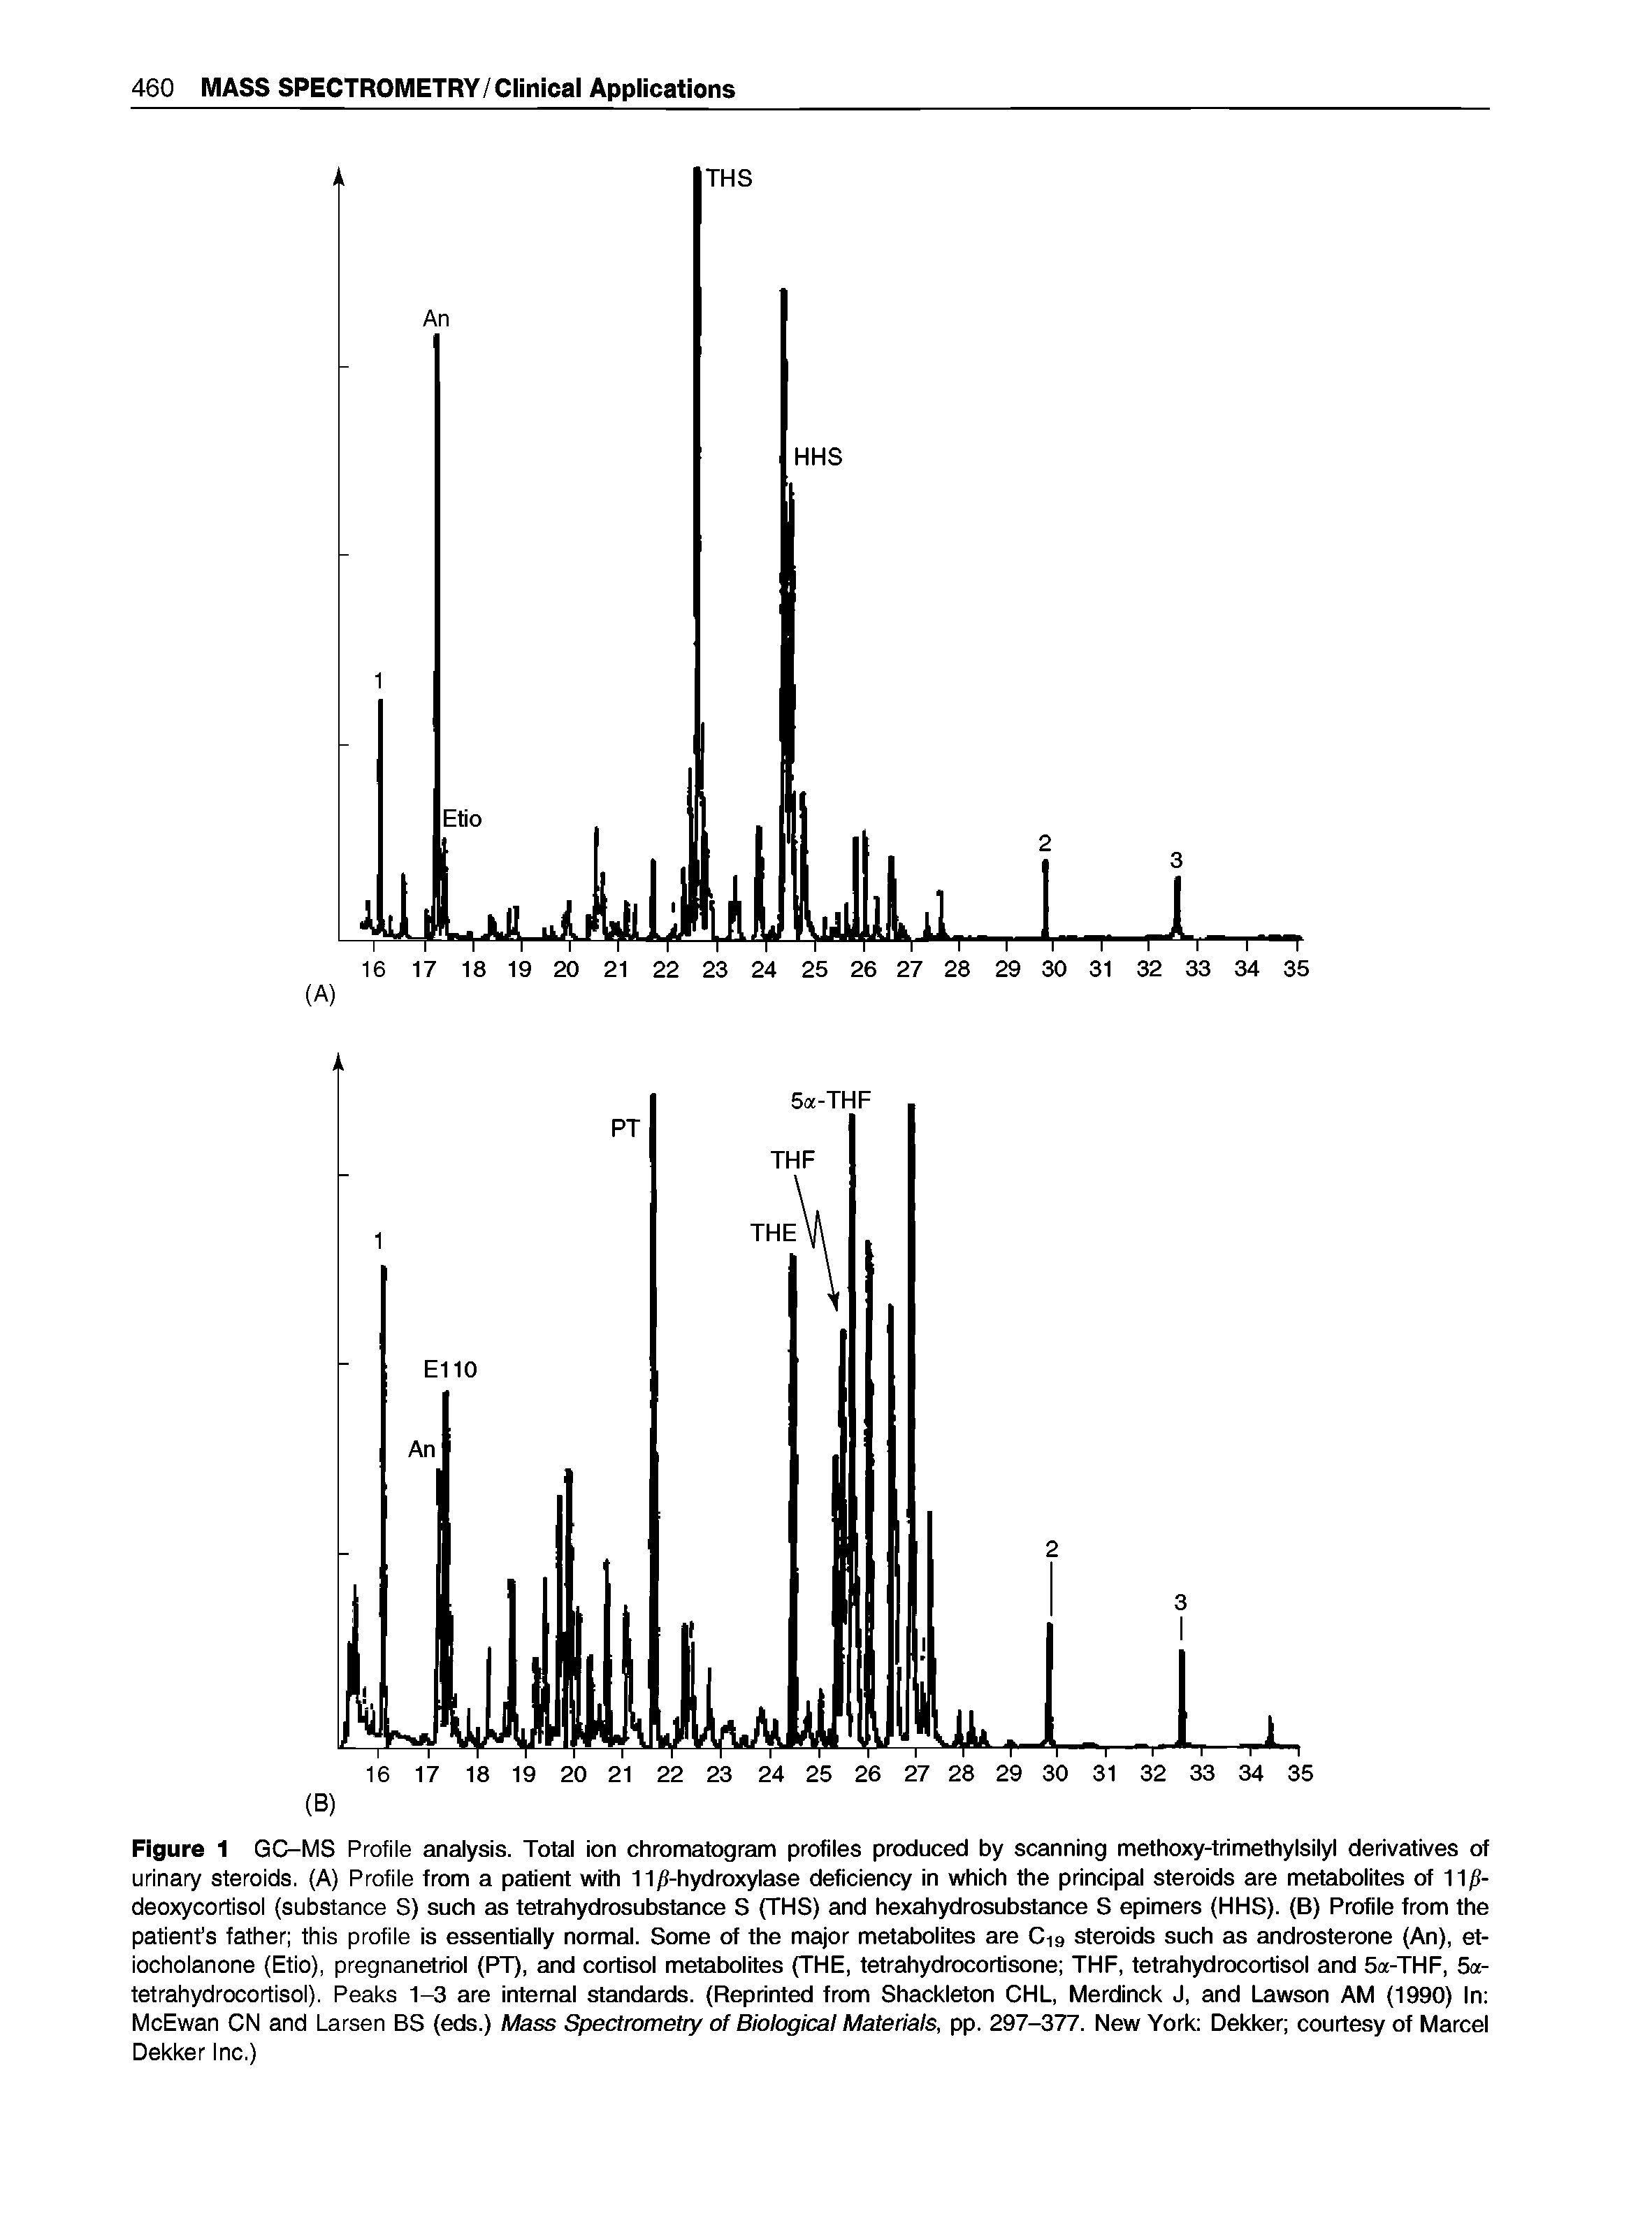 Figure 1 GC-MS Profile analysis. Total ion chromatogram profiles produced by scanning methoxy-trimethylsilyl derivatives of urinary steroids. (A) Profile from a patient with 11 -hydroxylase deficiency in which the principal steroids are metabolites of IIjS-deoxycortisol (substance S) such as tetrahydrosubstance S (THS) and hexahydrosubstance S epimers (HHS). (B) Profile from the patient s father this profile is essentially normal. Some of the major metabolites are C19 steroids such as androsterone (An), et-iocholanone (Etio), pregnanetriol (PT), and cortisol metabolites (THE, tetrahydrocortisone THF, tetrahydrocortisol and 5a-THF, 5a-tetrahydrocortisol). Peaks 1-3 are internal standards. (Reprinted from Shackleton CHL, Merdinck J, and Lawson AM (1990) In McEwan CN and Larsen BS (eds.) Mass Spectrometry of Biological Materials, pp. 297-377. New York Dekker courtesy of Marcel Dekker Inc.)...